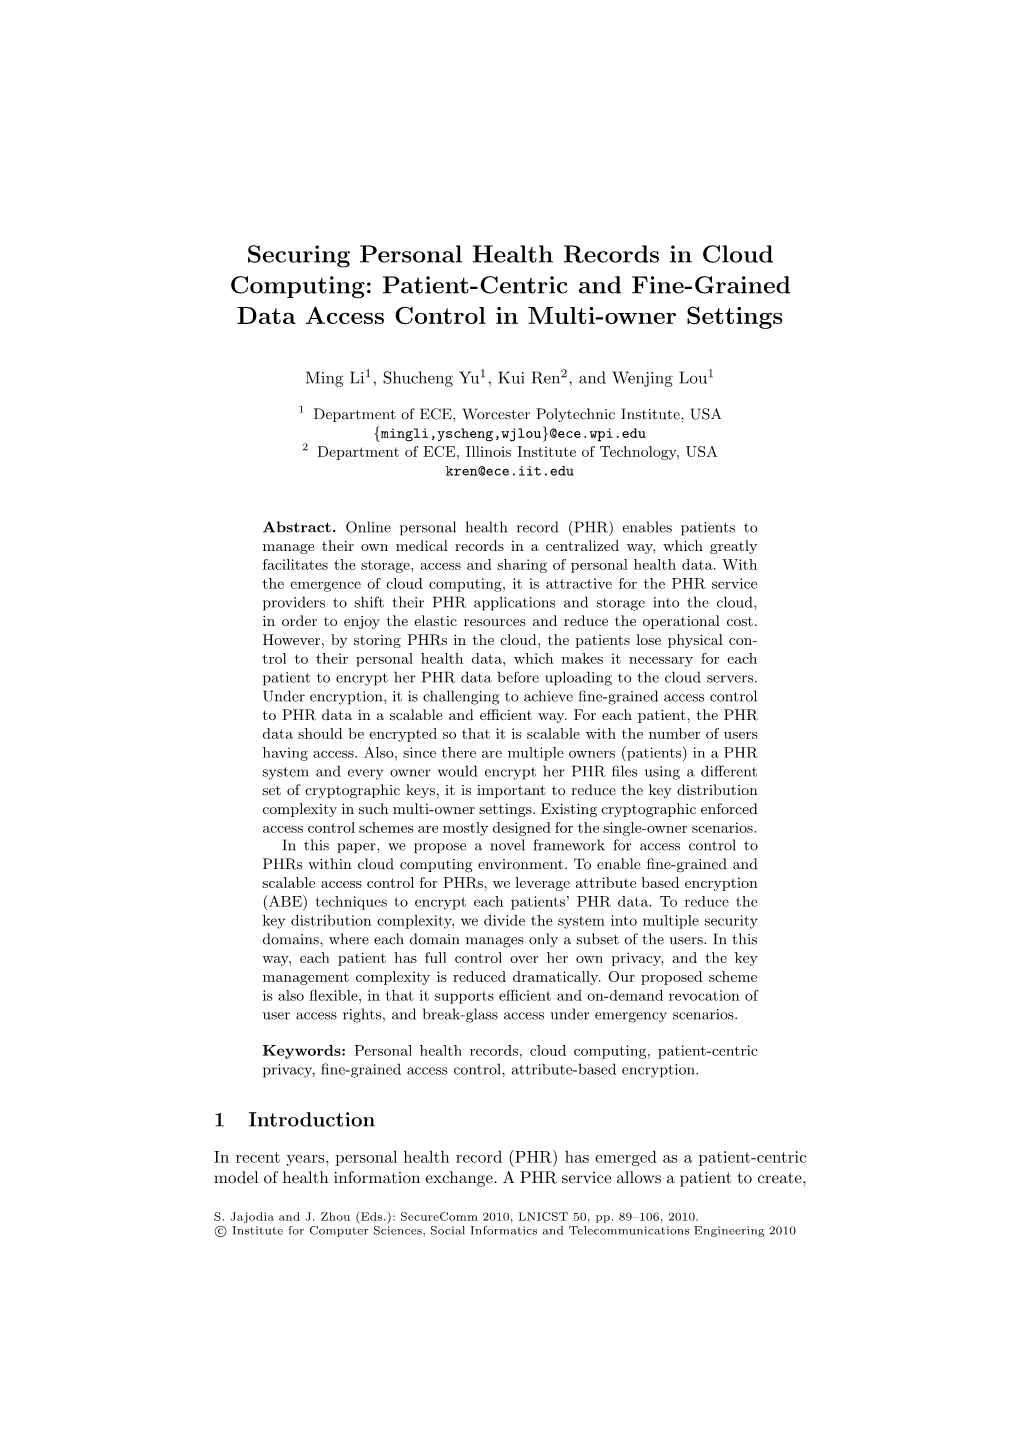 Securing Personal Health Records in Cloud Computing: Patient-Centric and Fine-Grained Data Access Control in Multi-Owner Settings